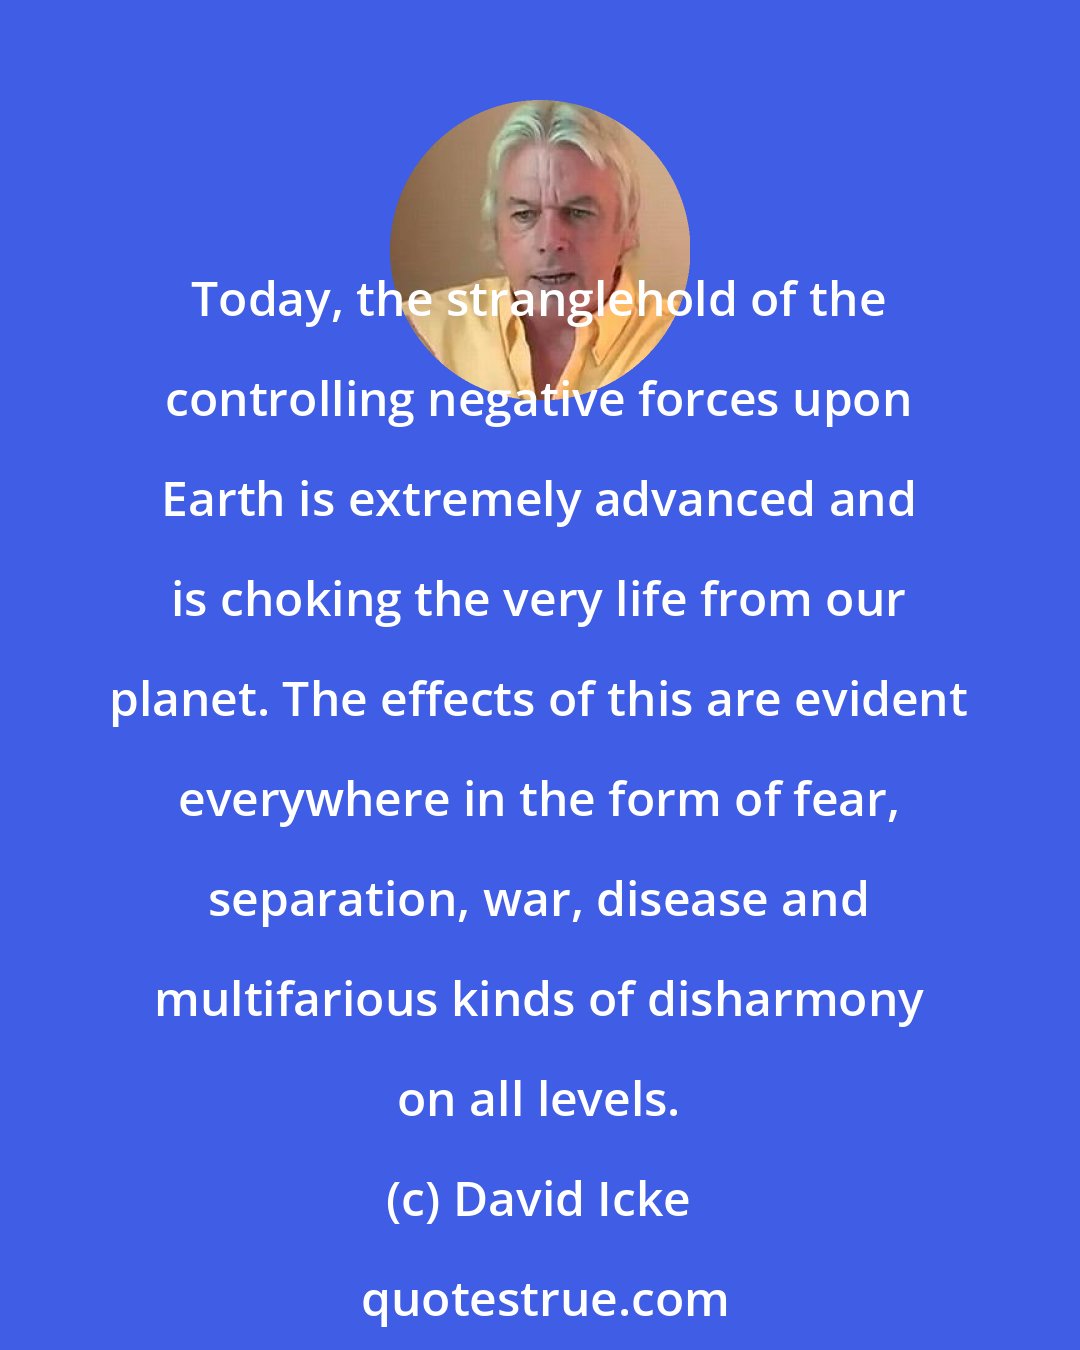 David Icke: Today, the stranglehold of the controlling negative forces upon Earth is extremely advanced and is choking the very life from our planet. The effects of this are evident everywhere in the form of fear, separation, war, disease and multifarious kinds of disharmony on all levels.